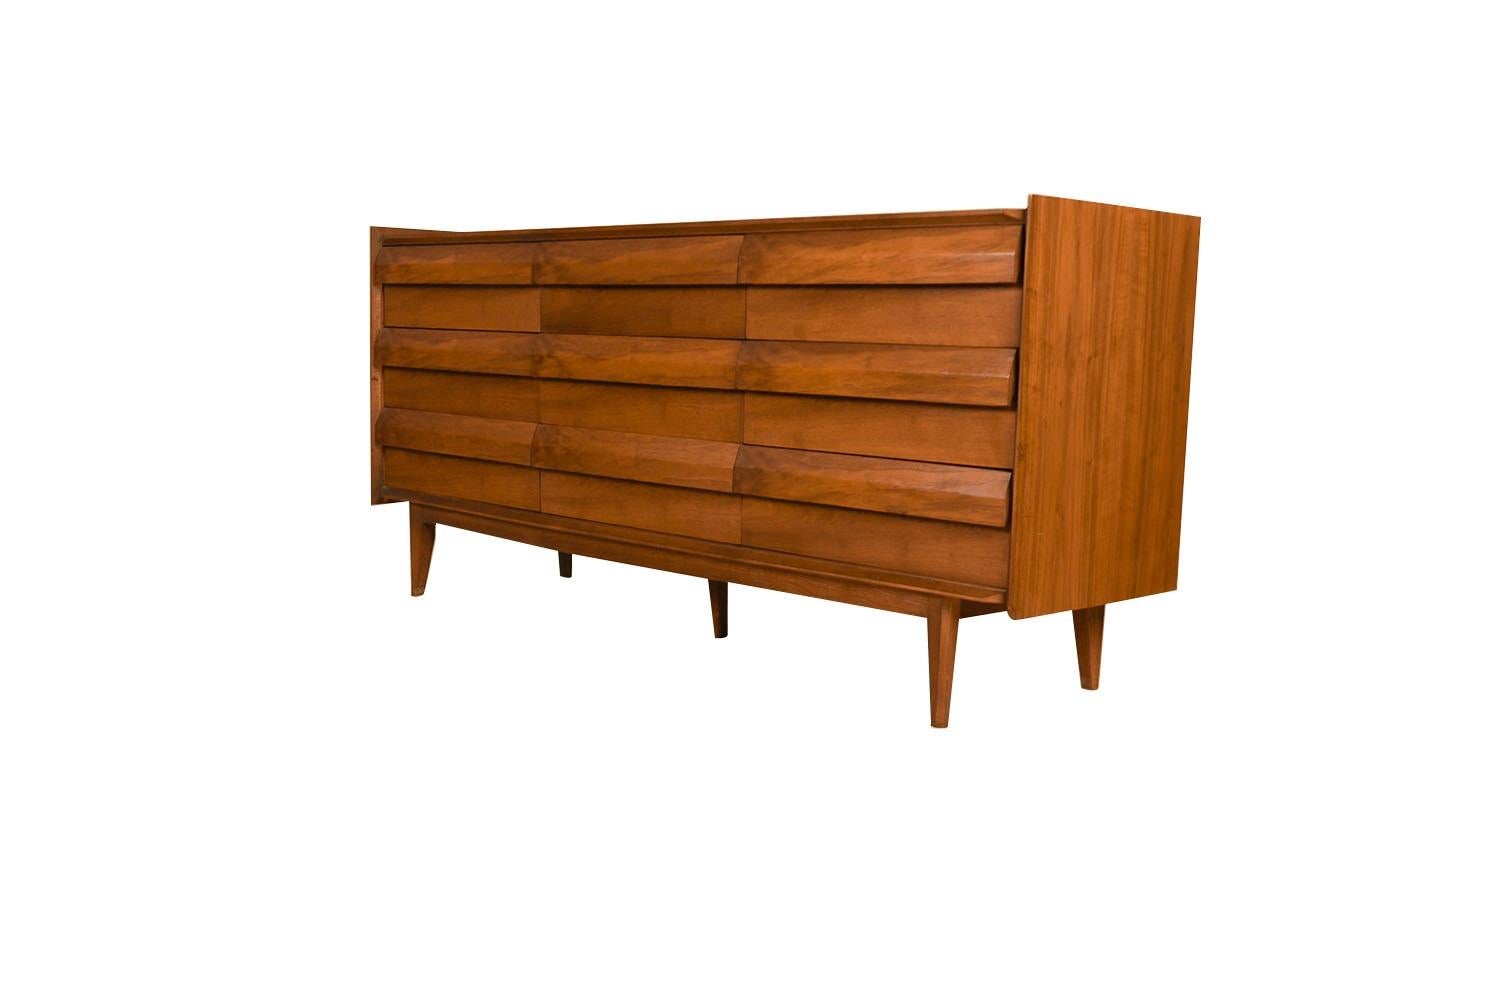 An elegant Mid-Century Modern Lane First Edition 9-Drawer Dresser in Walnut, c. 1960s. This is a beautiful example of Mid-Century craftsmanship by Lane Furniture. Features nine louvered drawers. An extremely well made and solid piece in great